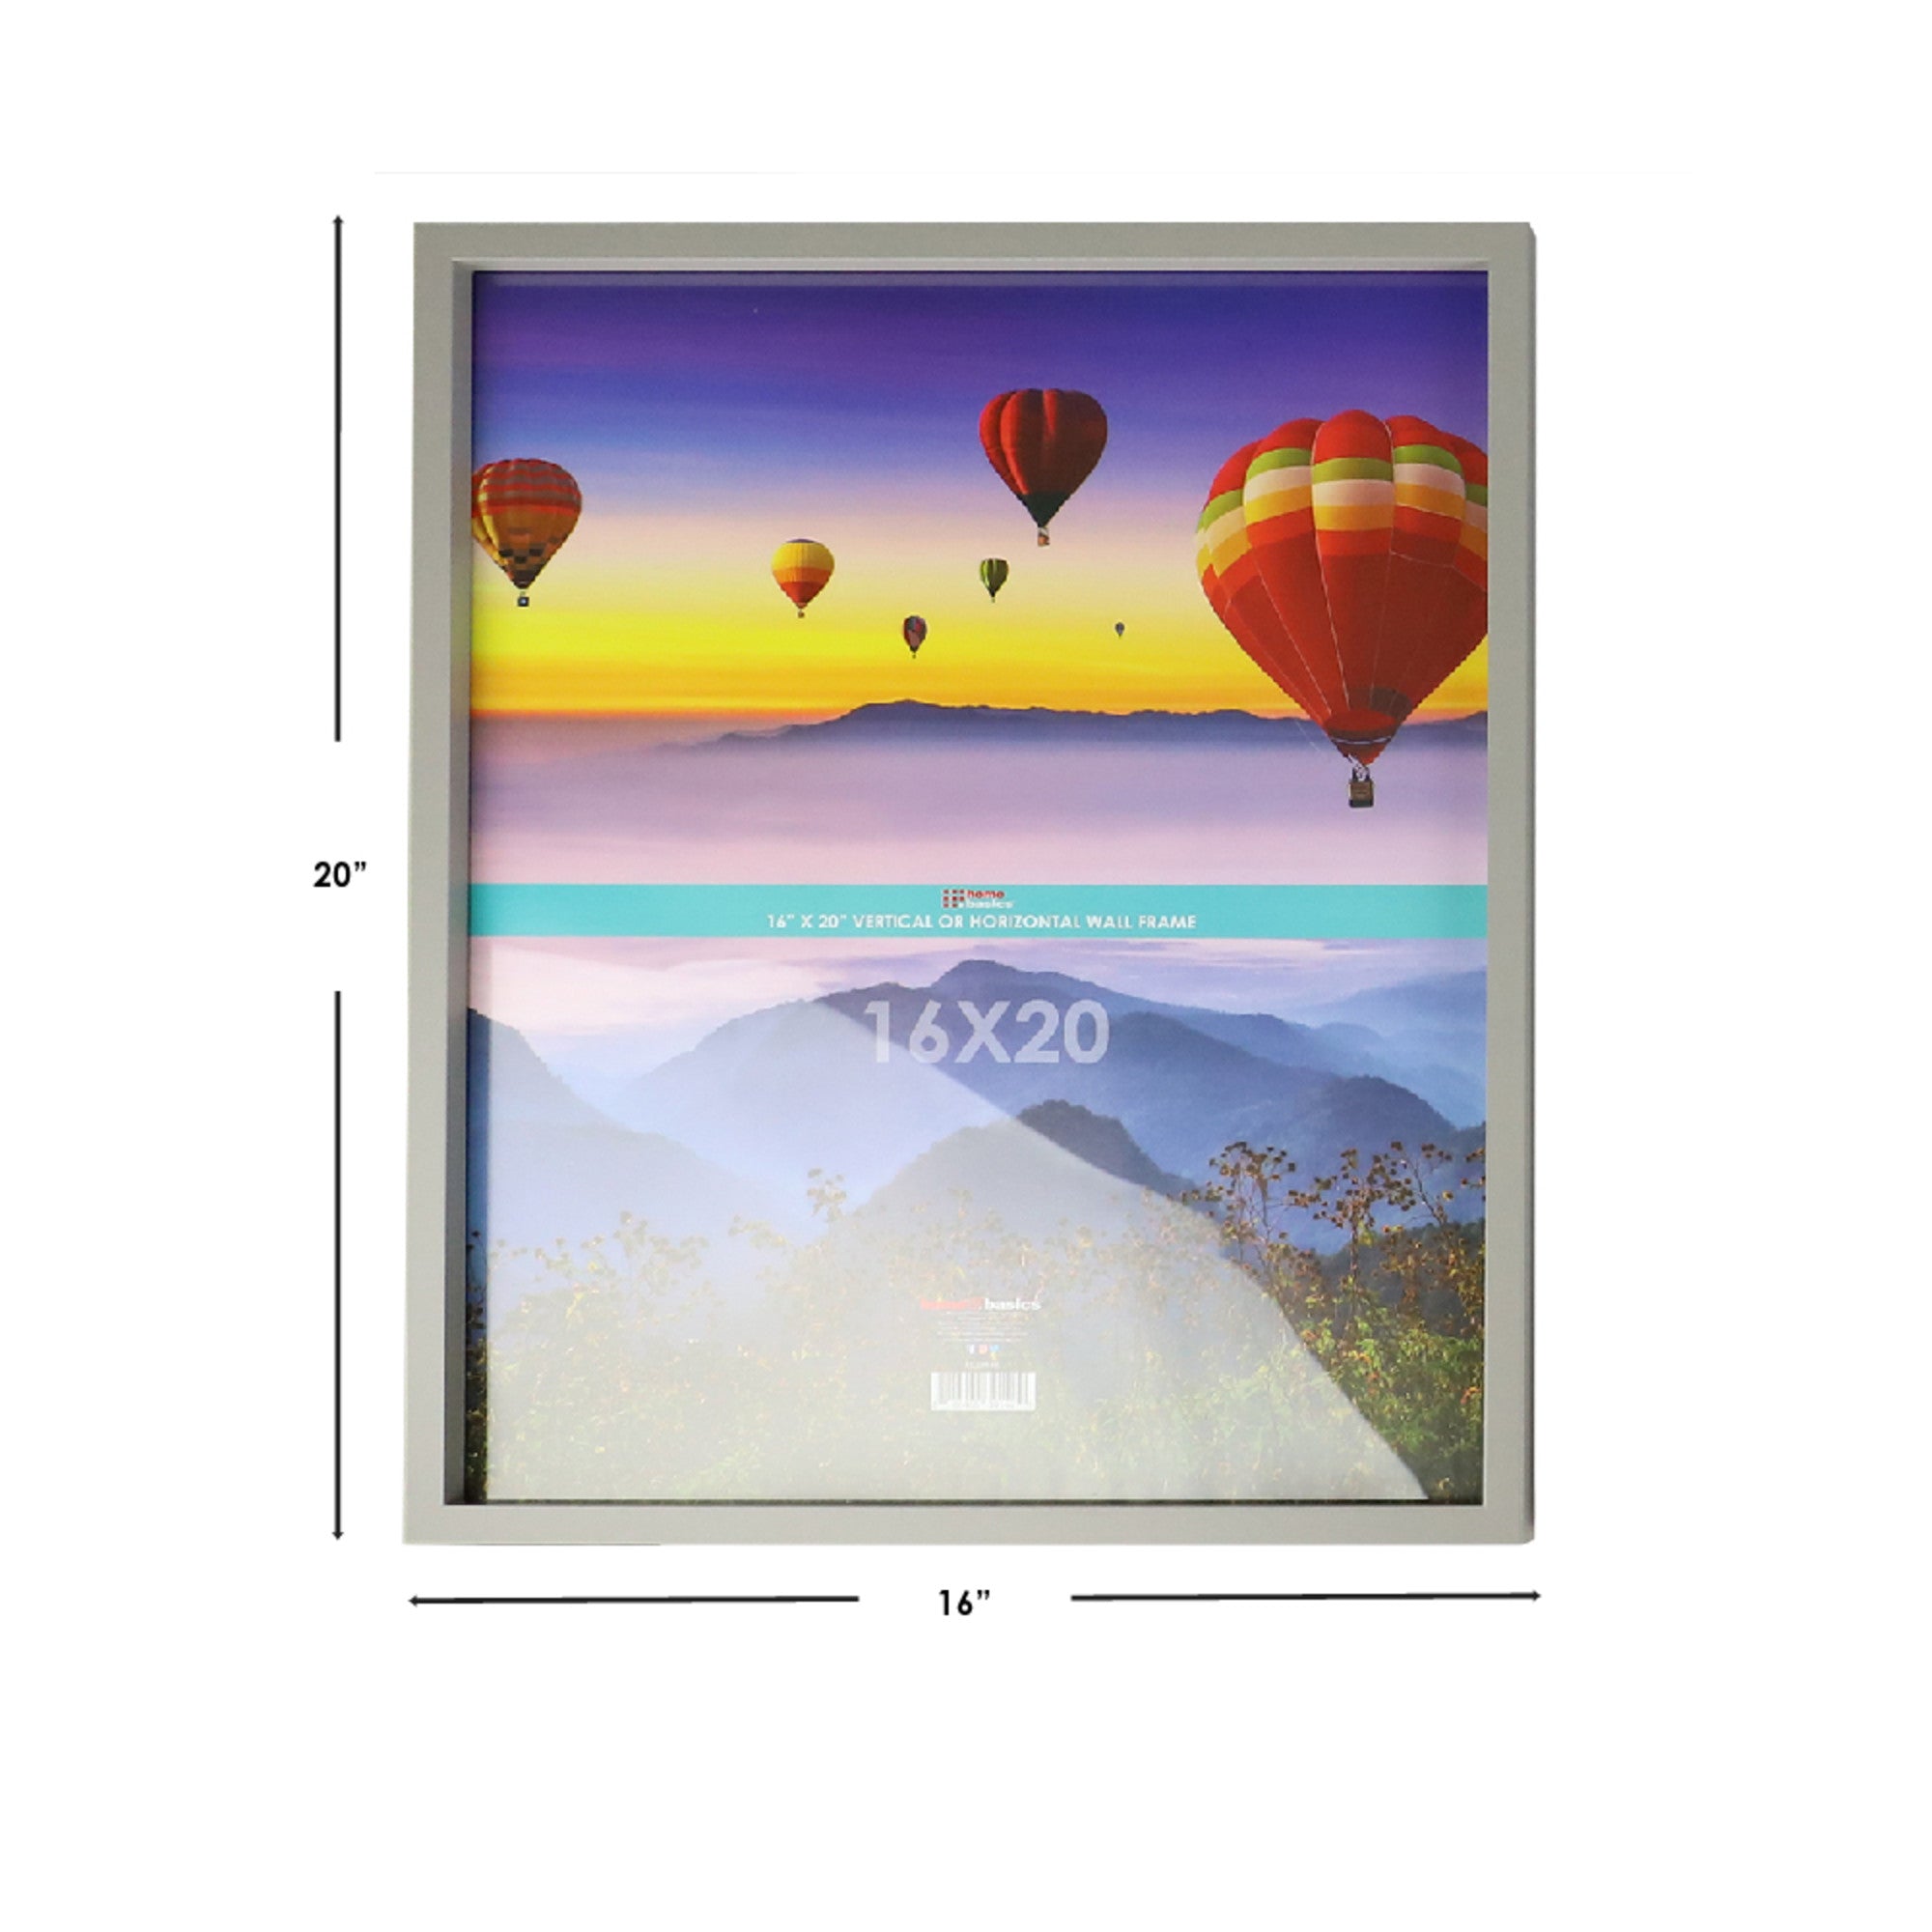 Home Basics 16” x 20” MDF Wall Picture Frame - Assorted Colors